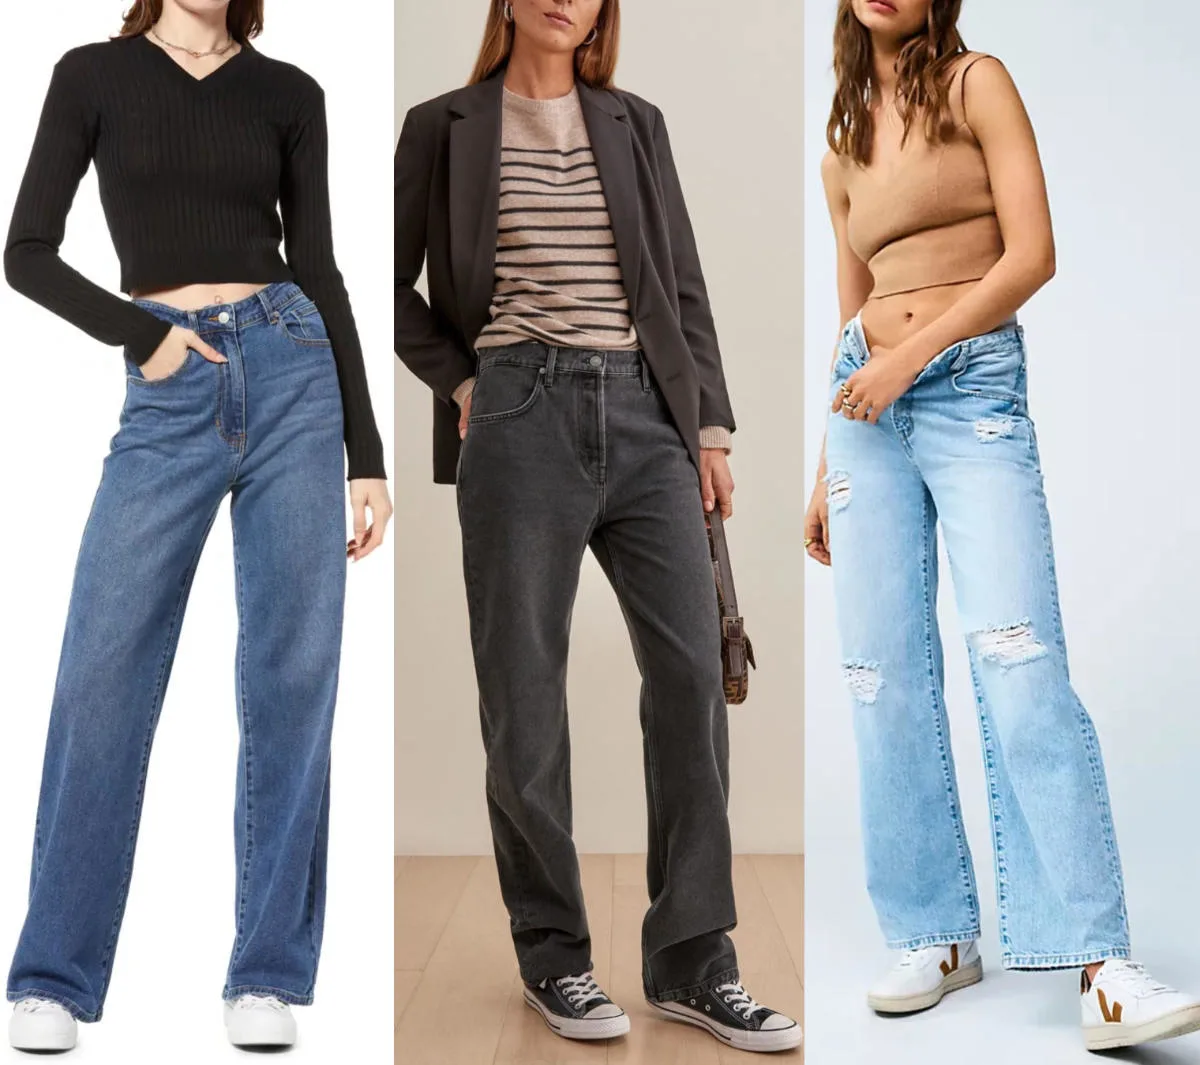 Shoes to wear with baggy jeans - Buy and Slay